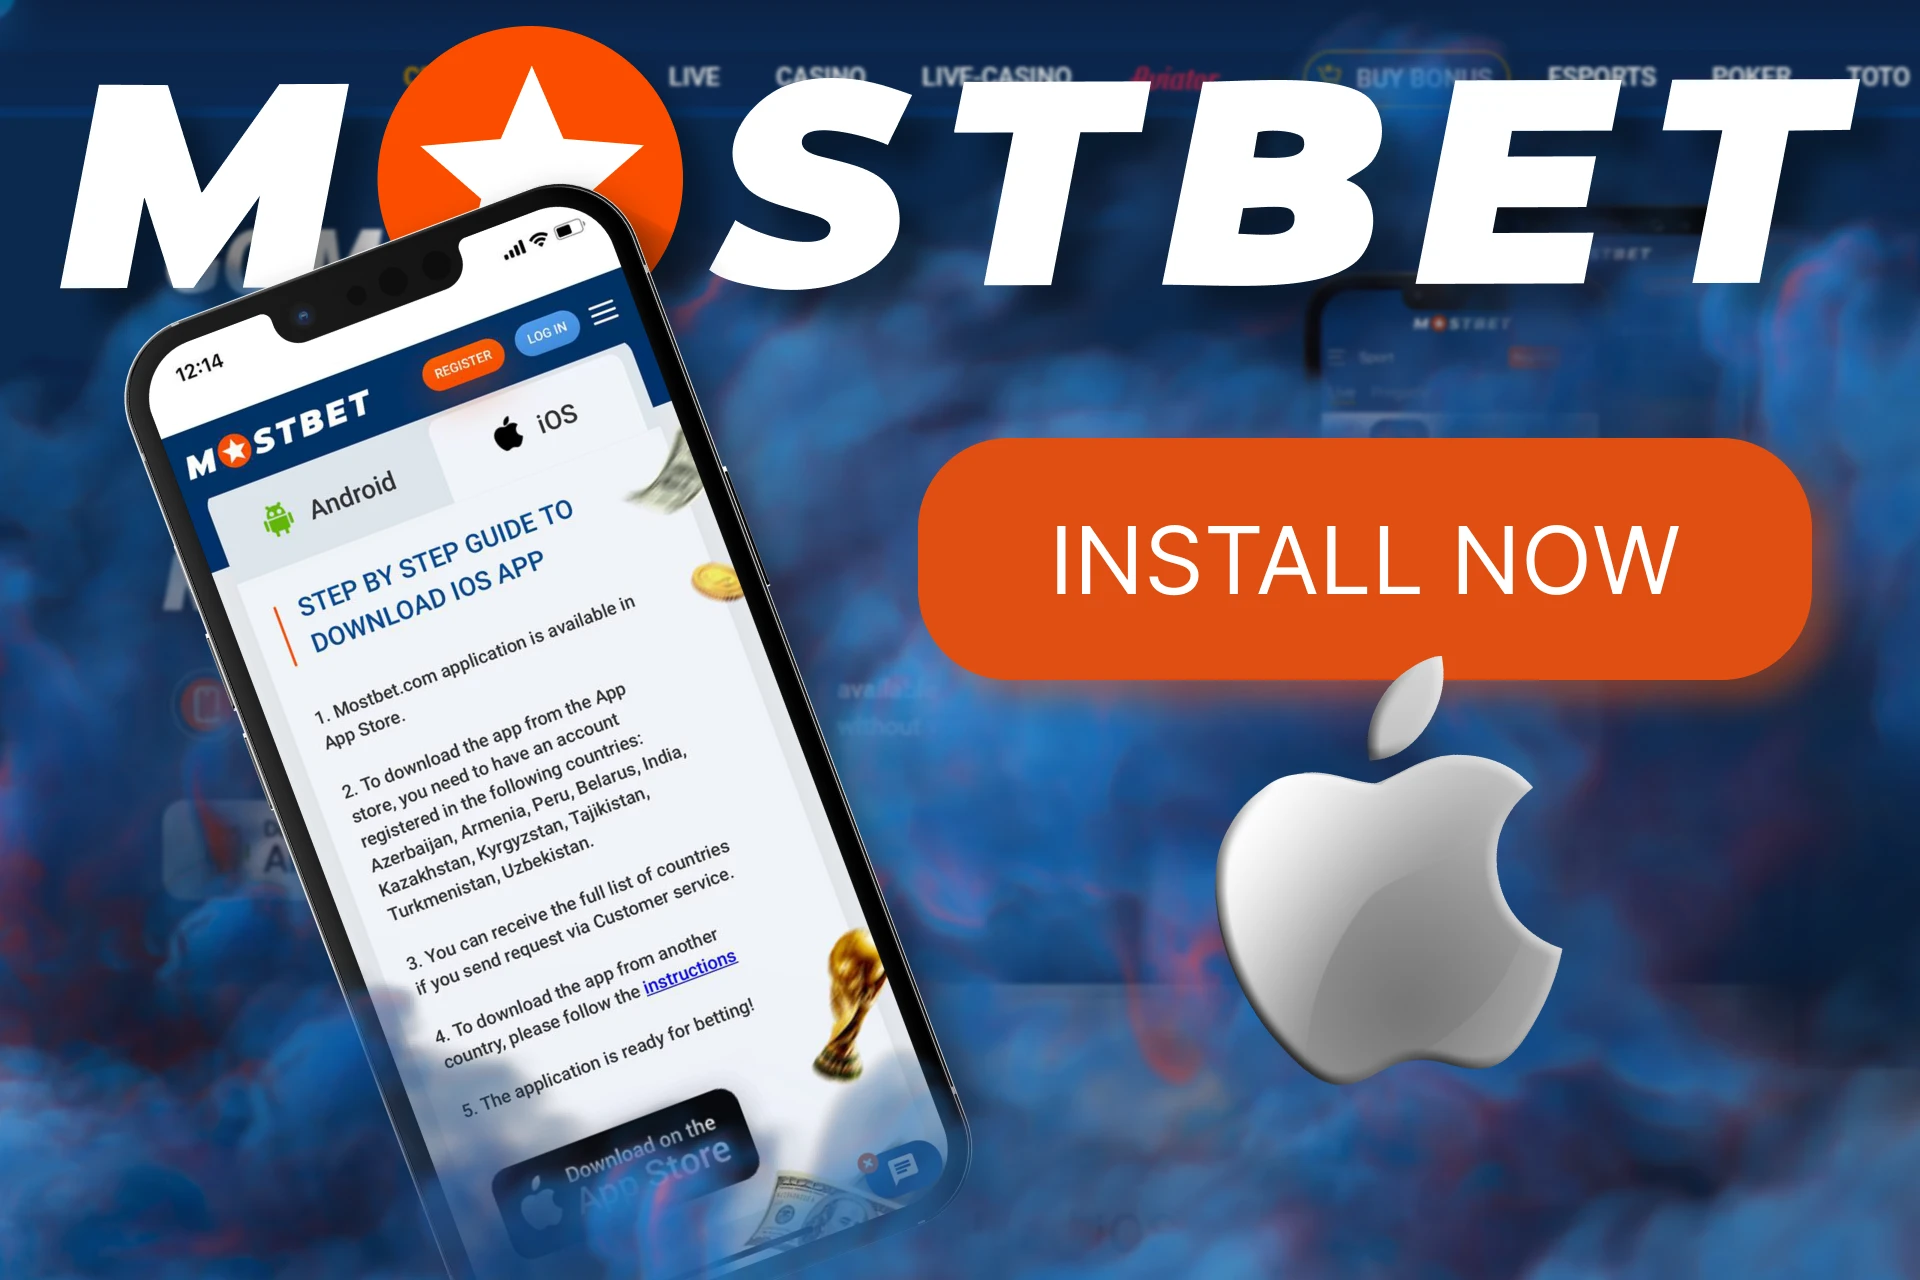 Install the Mostbet app on iOS quickly with these instructions.